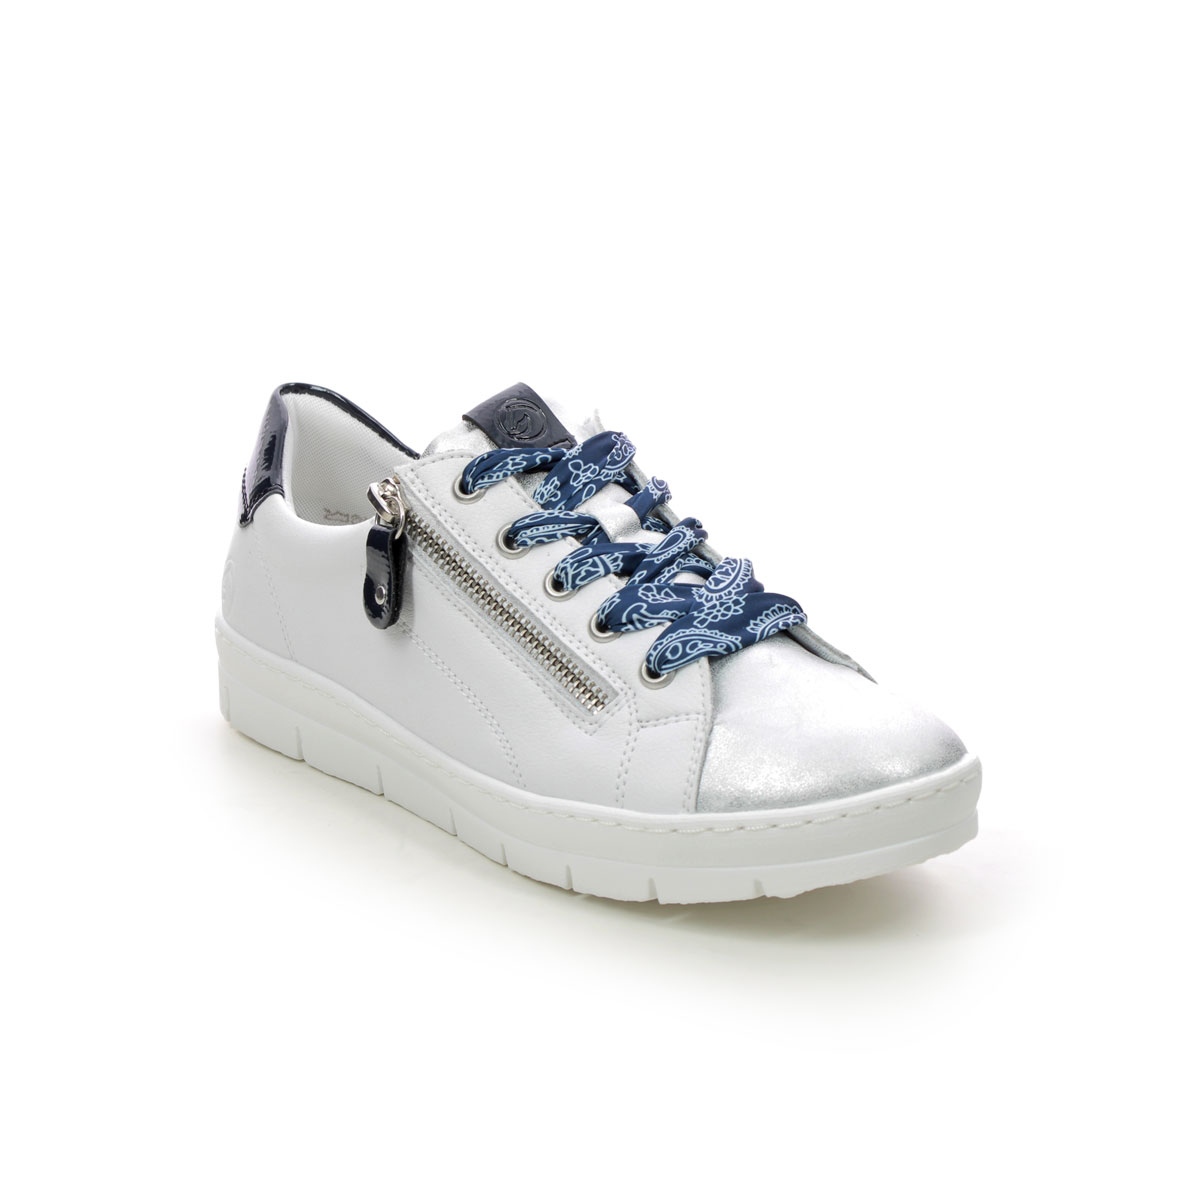 Remonte Ravenna 11 White Navy  Womens Trainers D5825-80 In Size 37 In Plain White Navy